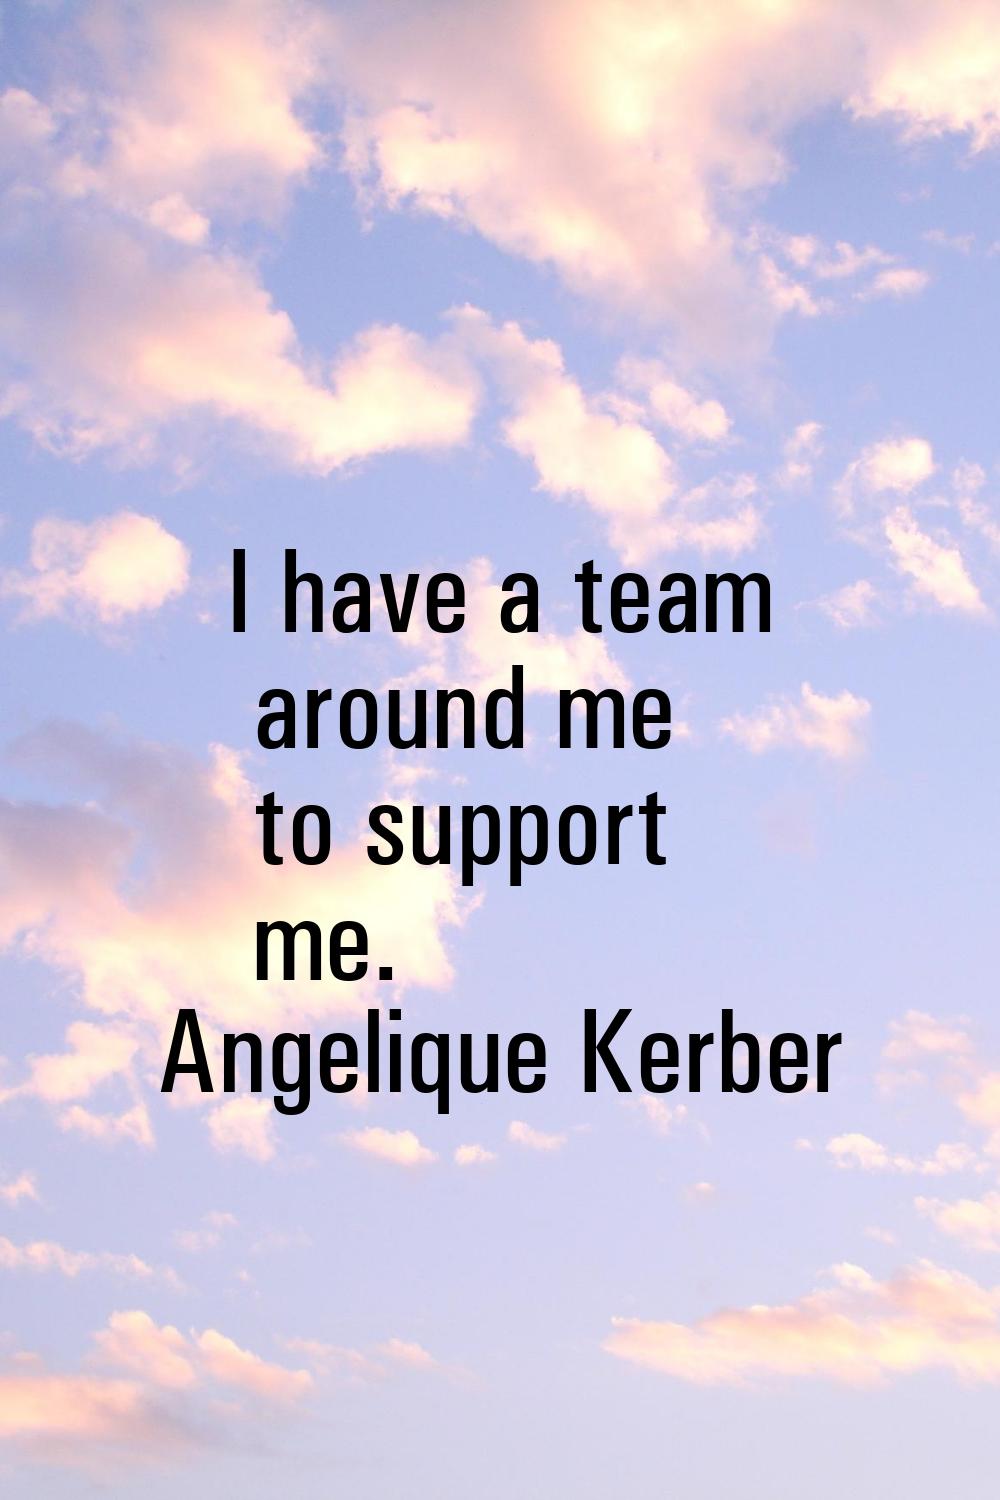 I have a team around me to support me.